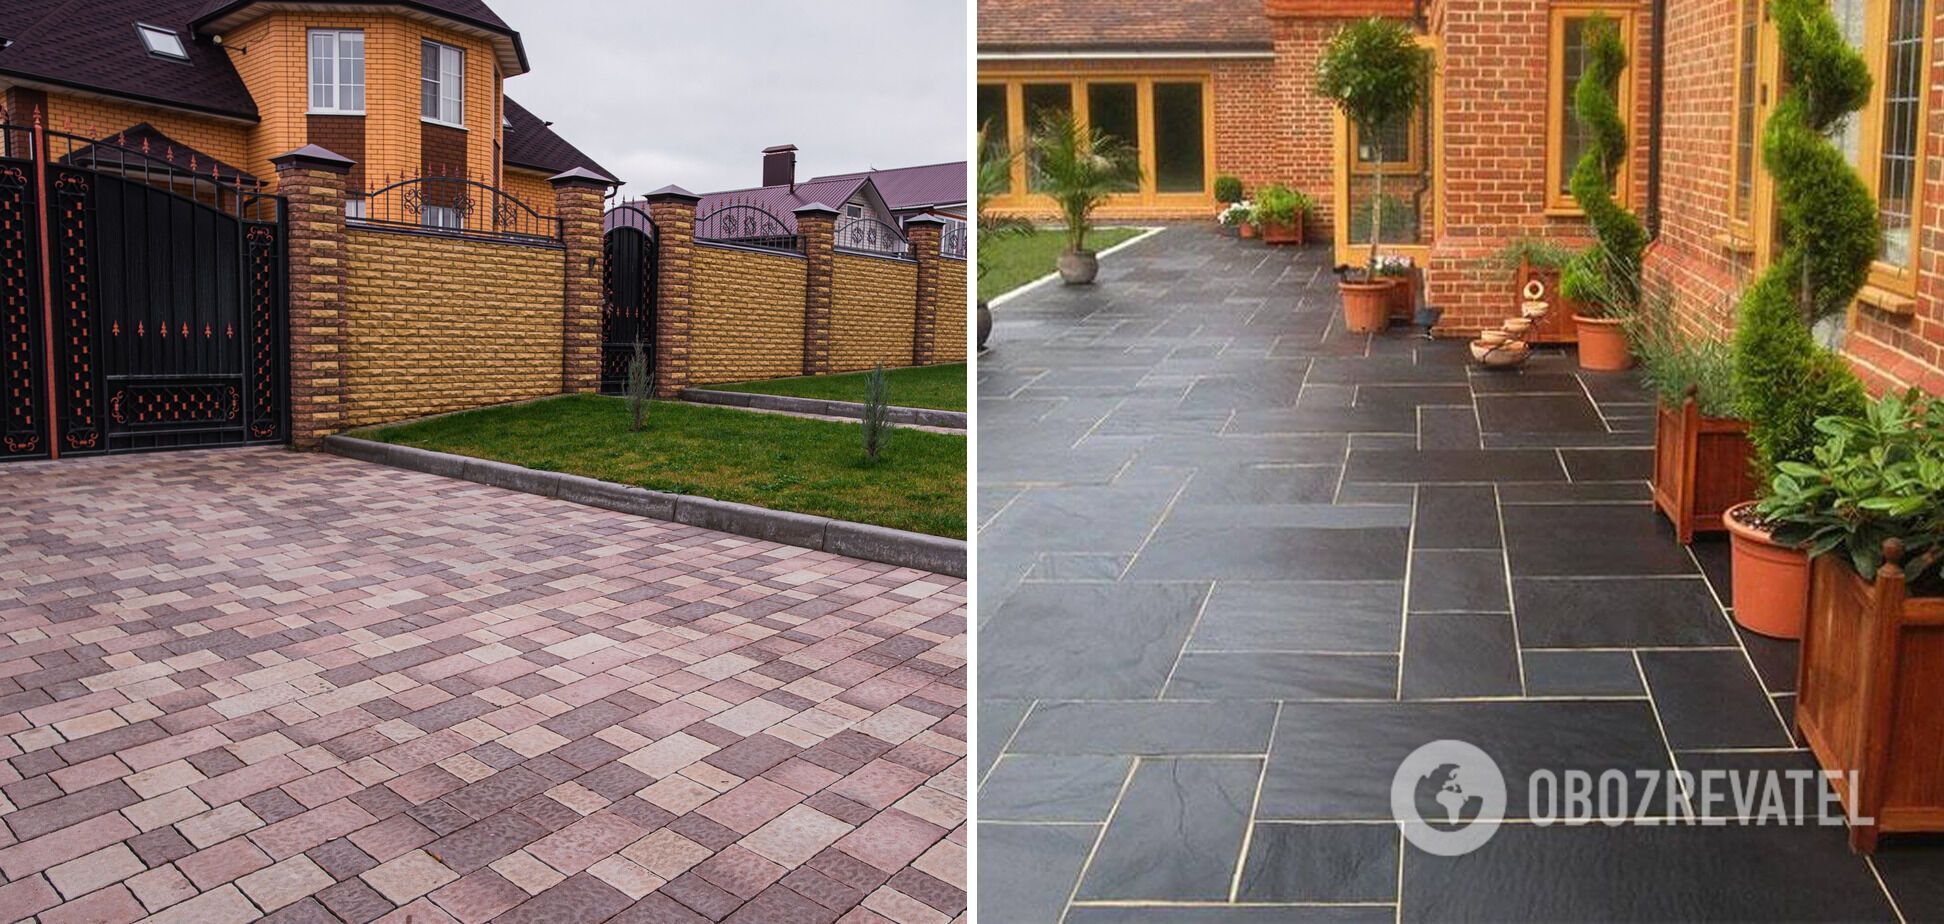 How to easily clean paving tiles in the yard